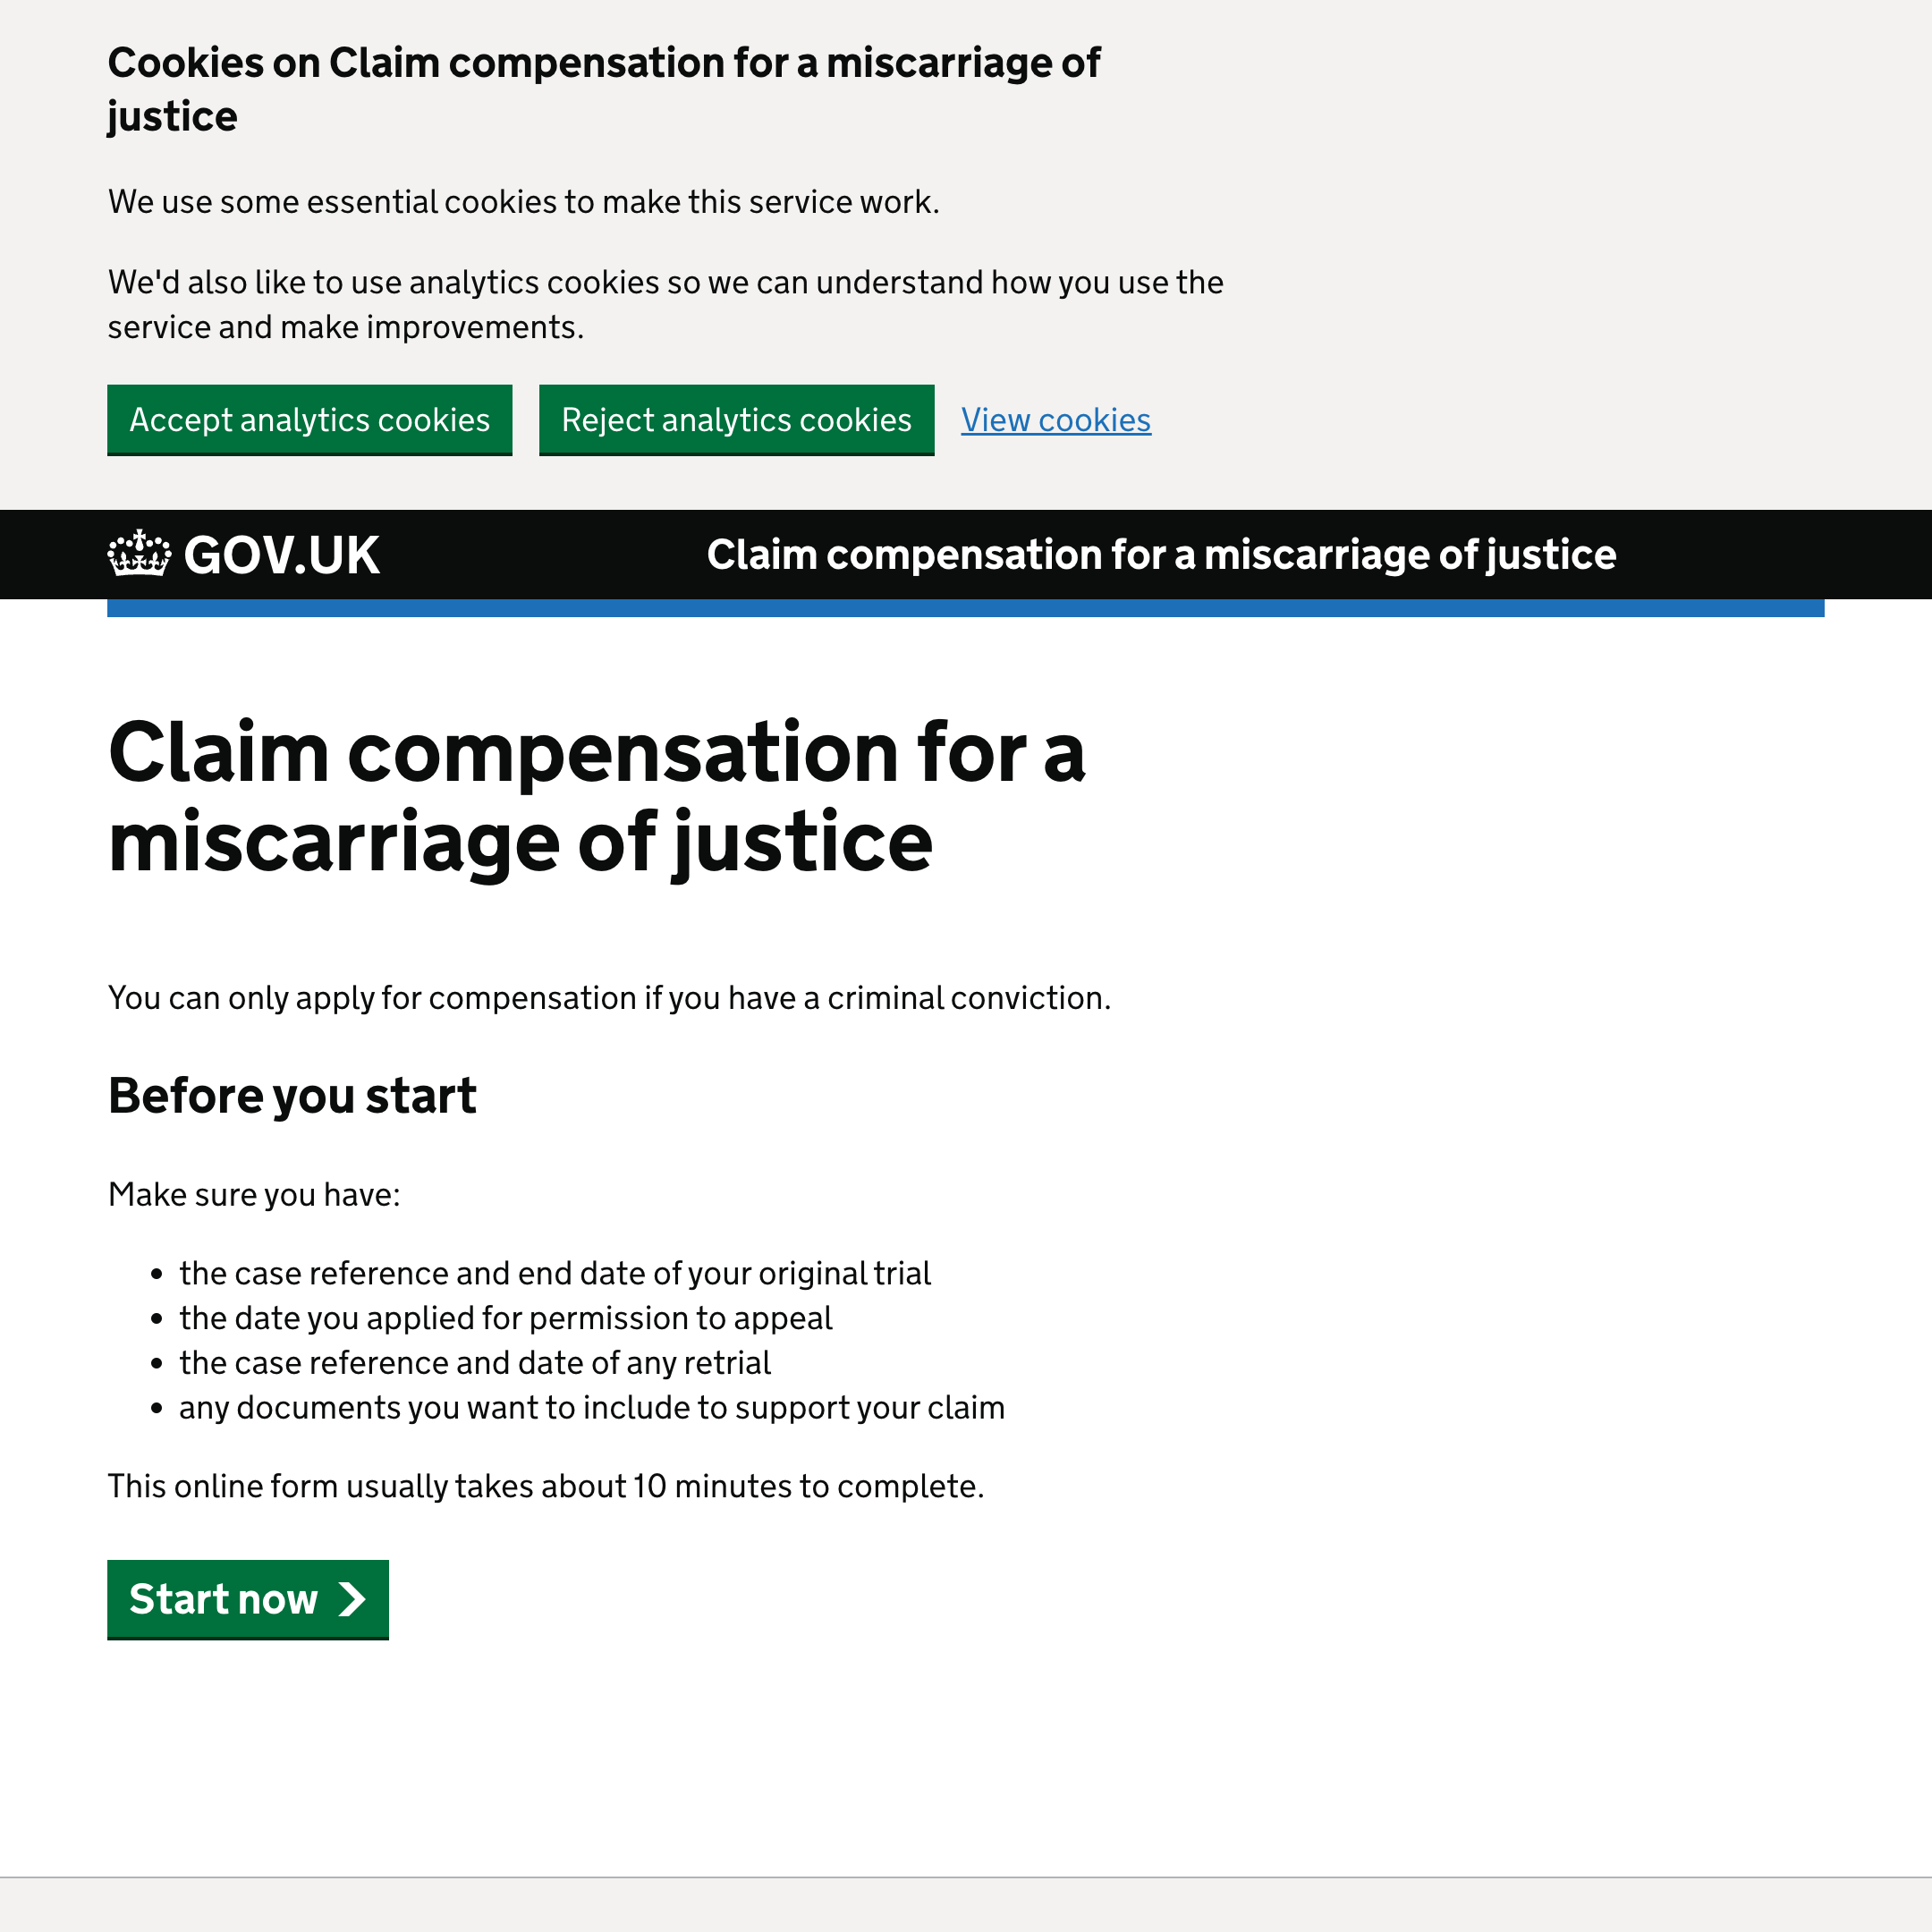 Claim compensation for a miscarriage of justice